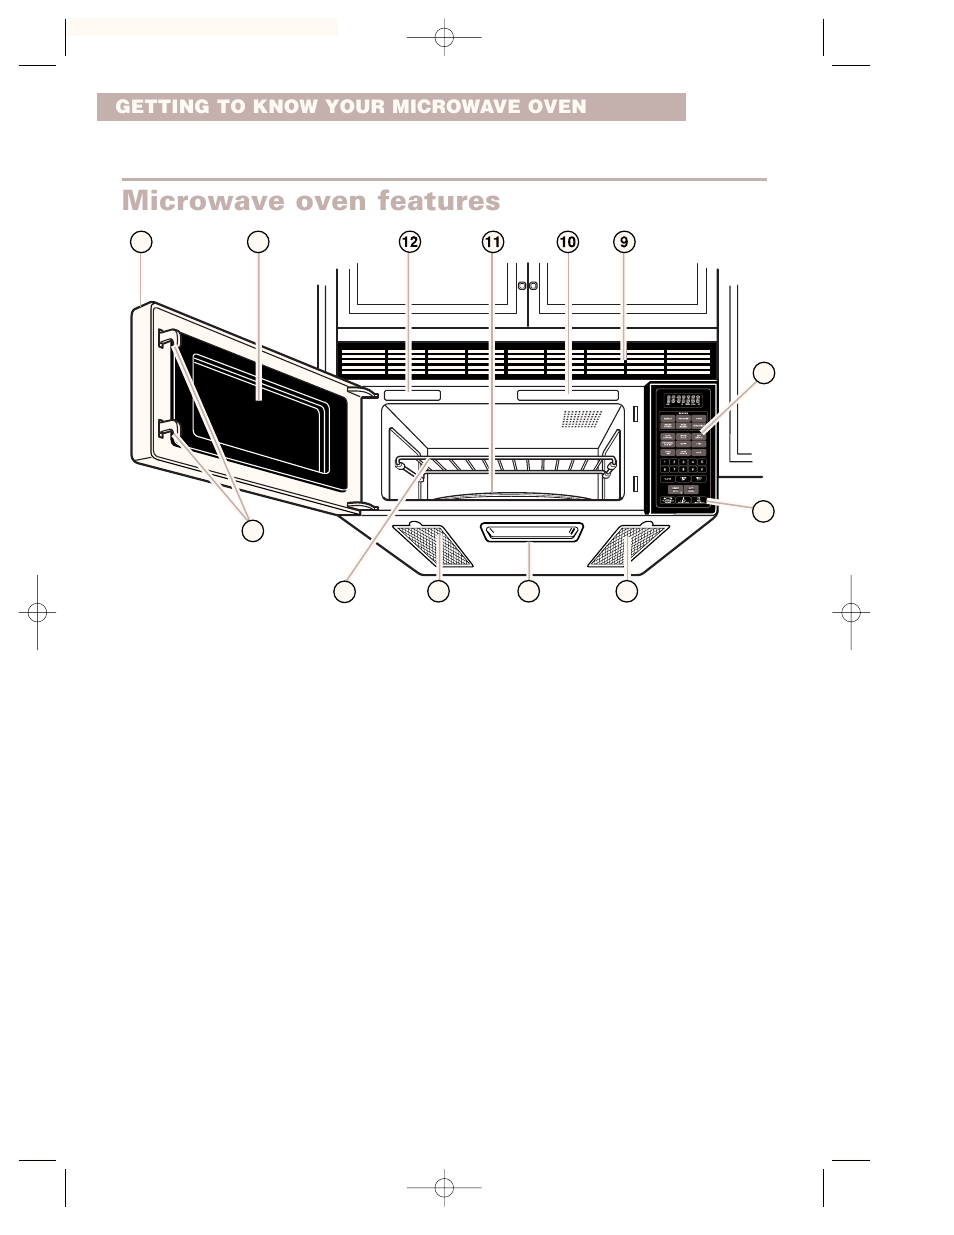 Microwave oven features | Whirlpool GH7155XHS User Manual | Page 8 / 30 |  Original mode